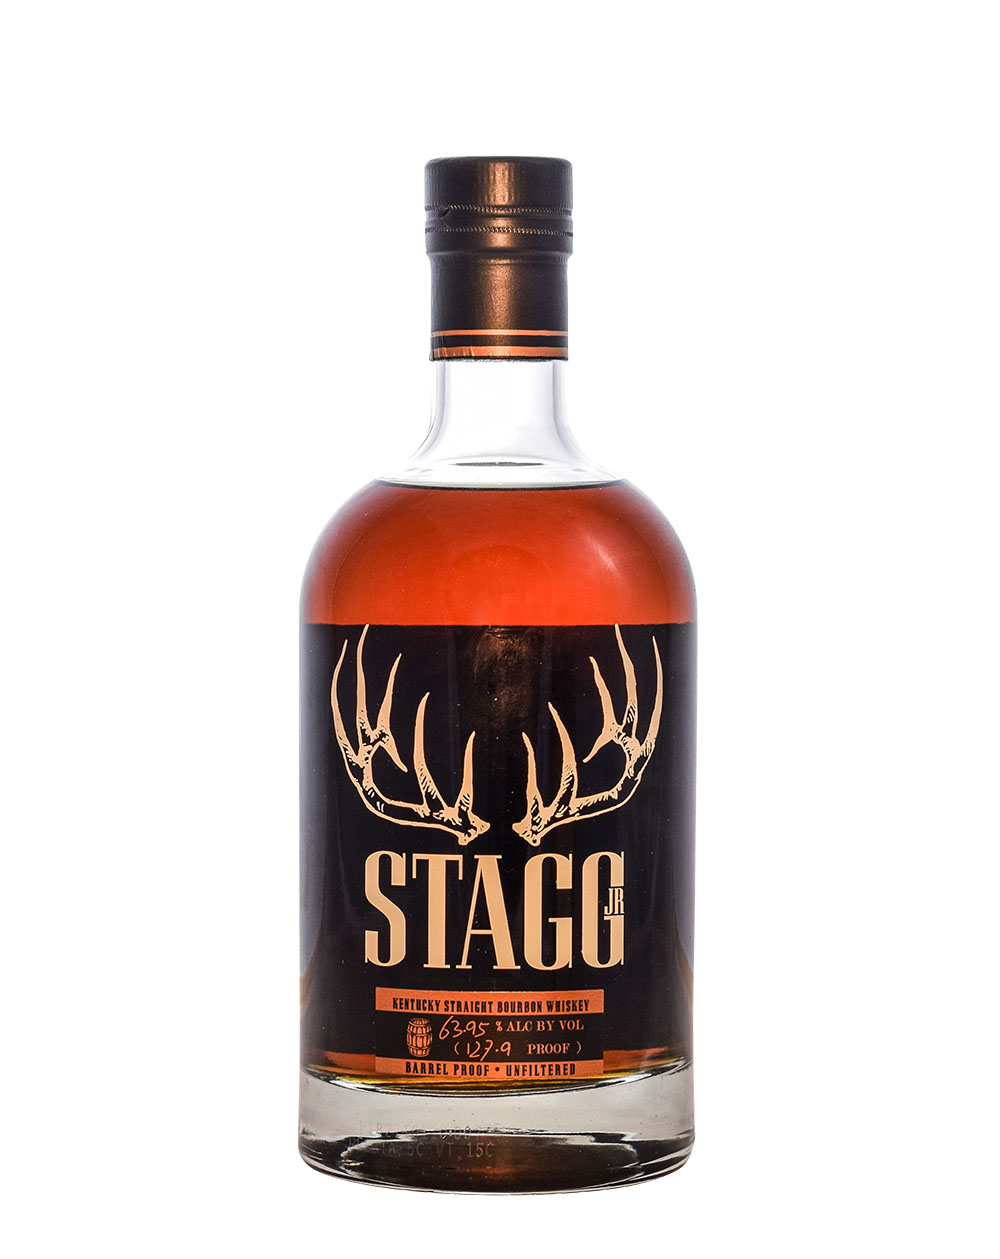 Stagg Jr. Batch 11 – Kentucky Straight Bourbon (127.9 Proof) Musthave Malts MHM